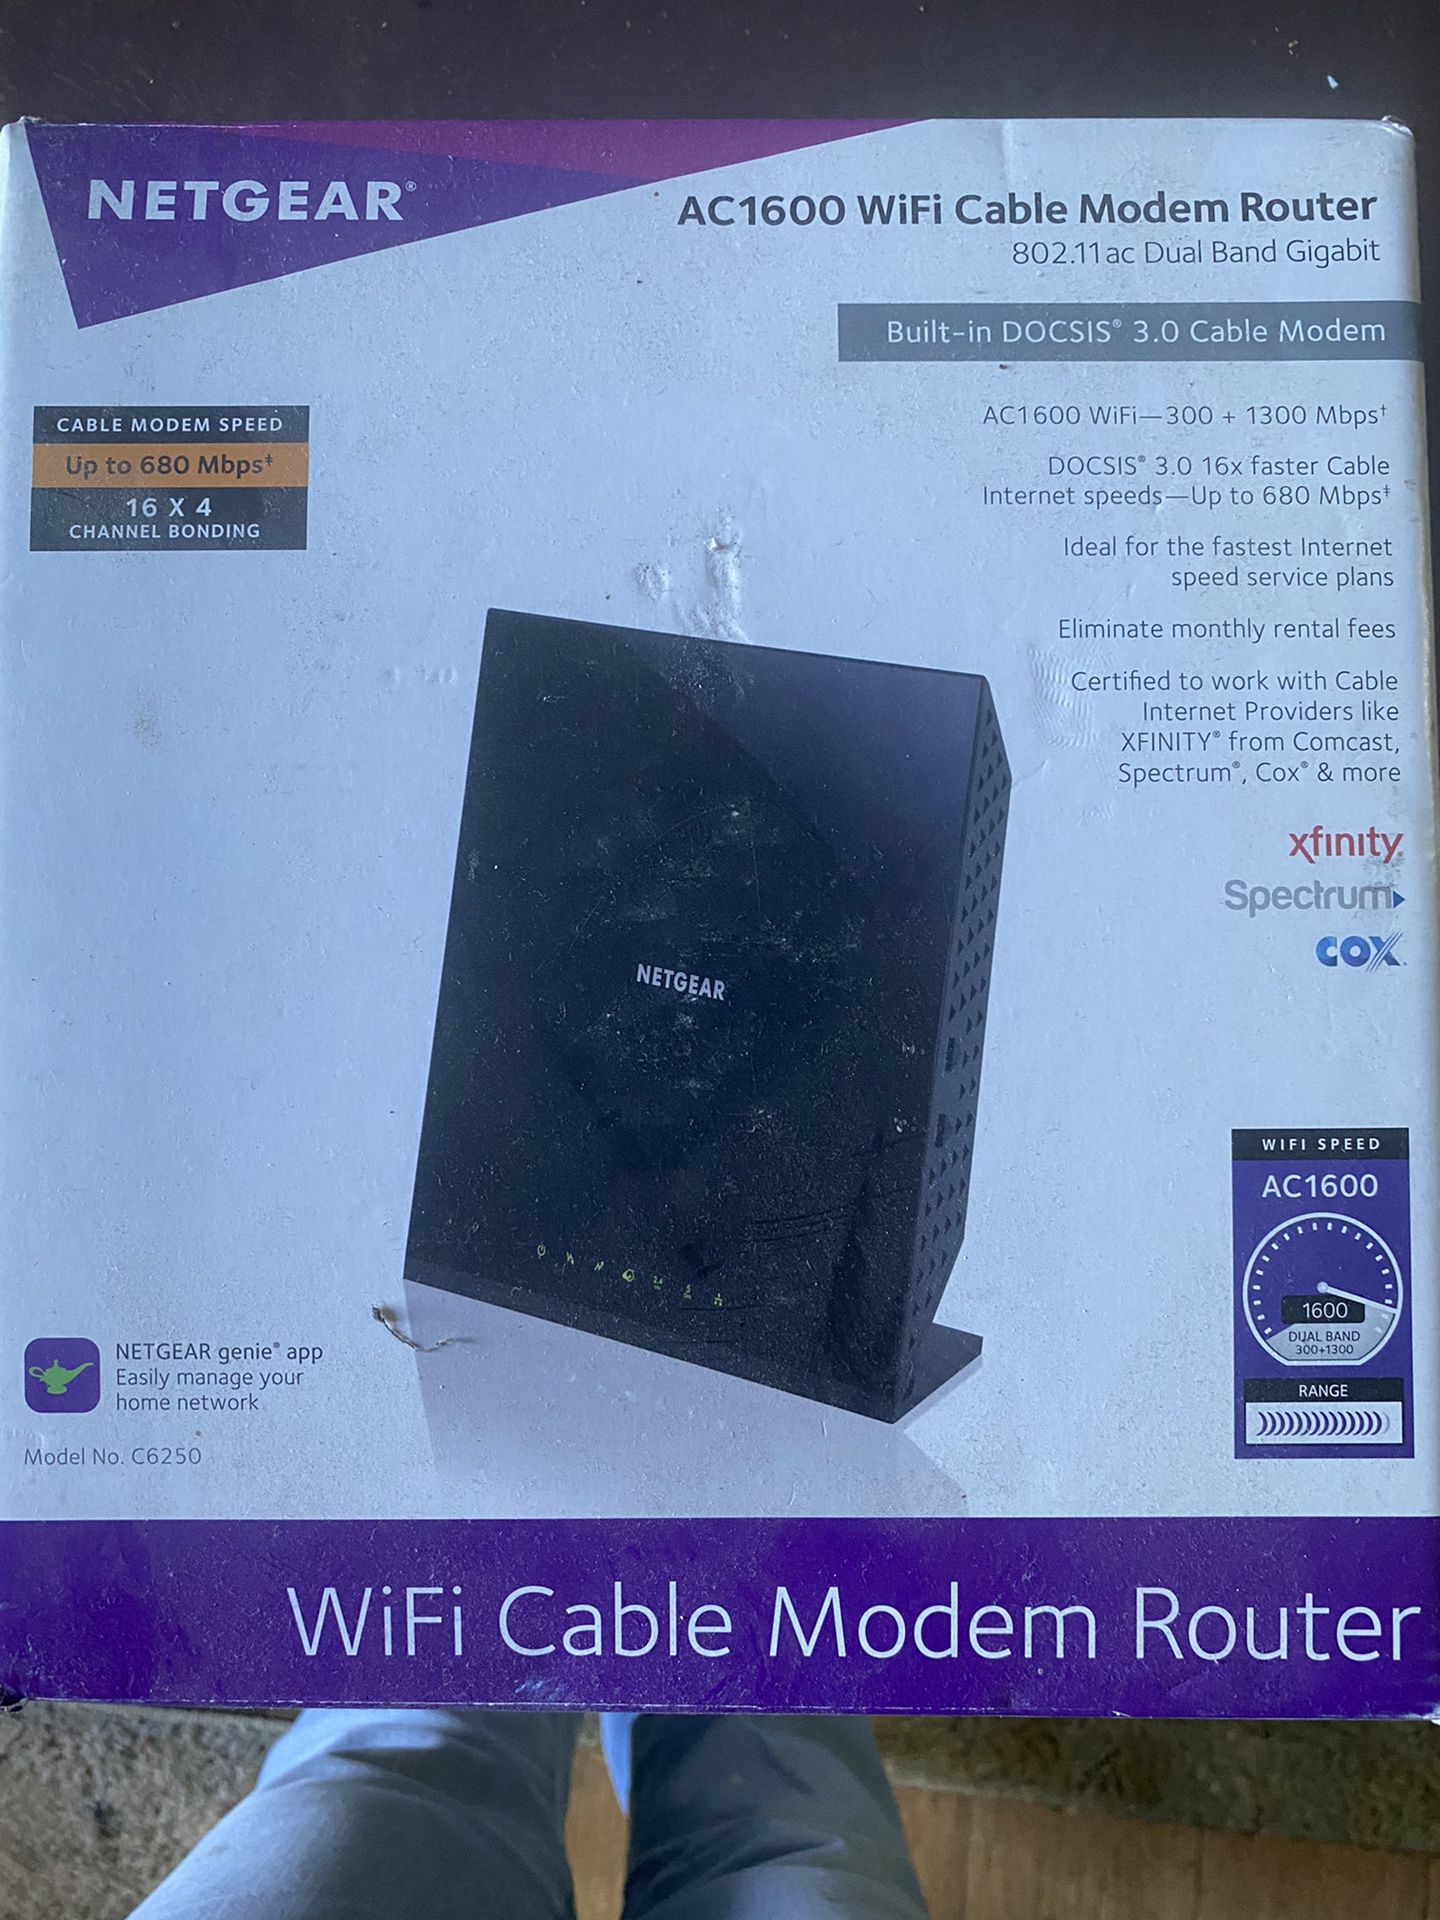 WiFi. Modem. Router